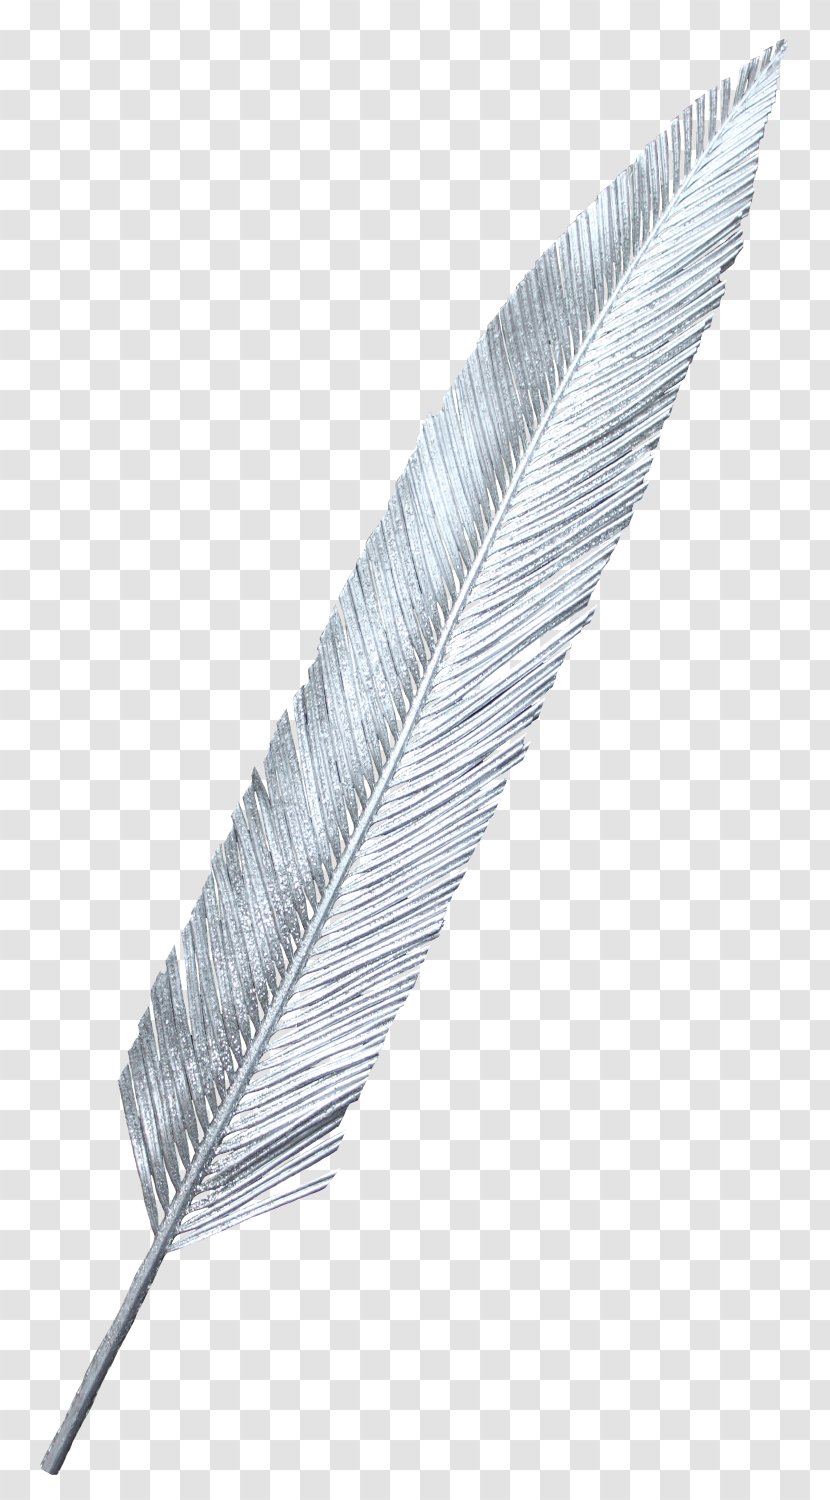 White Feather - Feathers Transparent PNG